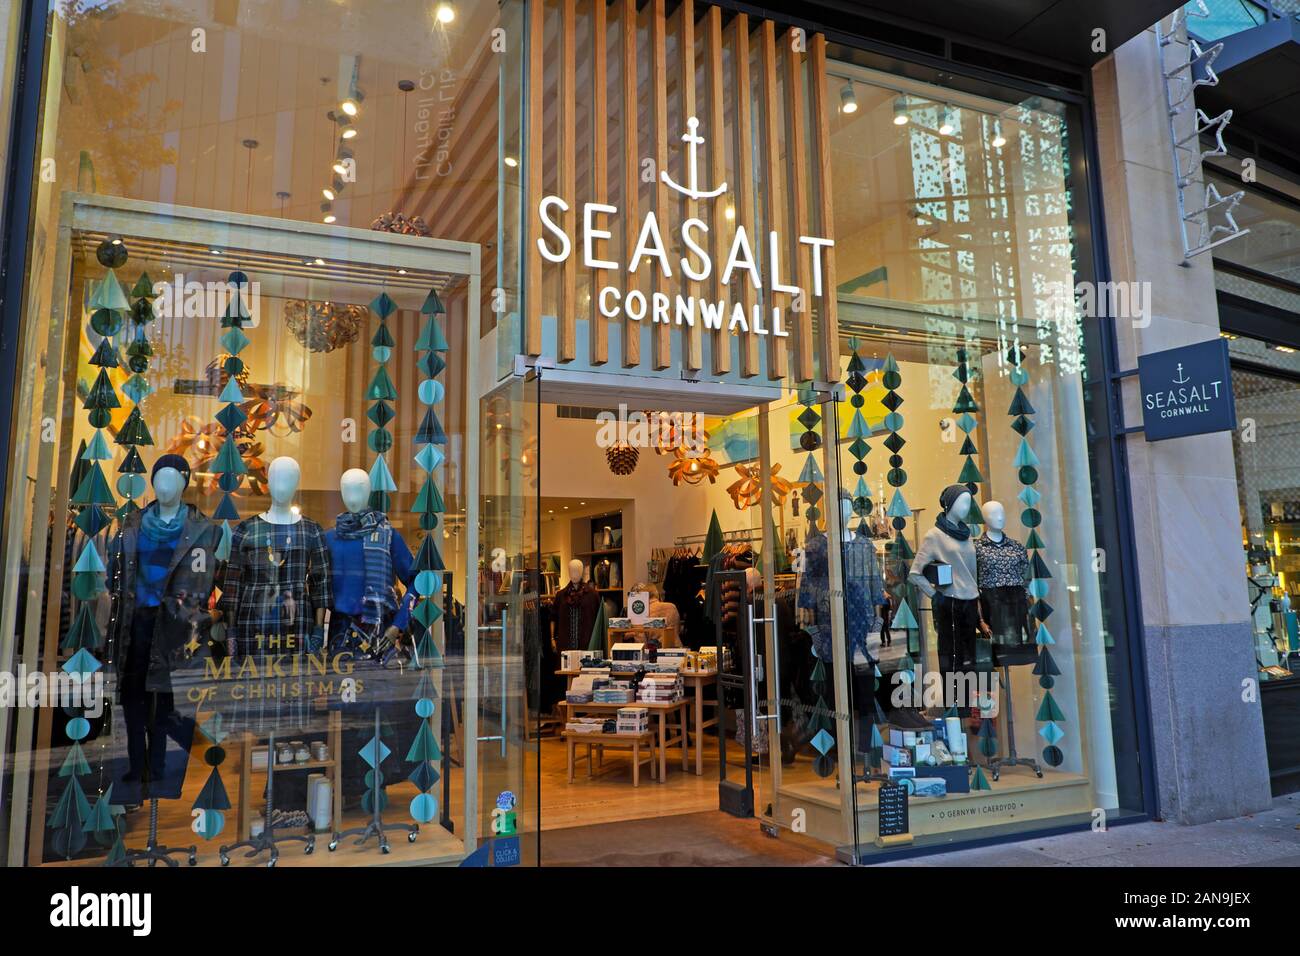 Seasalt Cornwall clothing store exterior outside view of shopfront